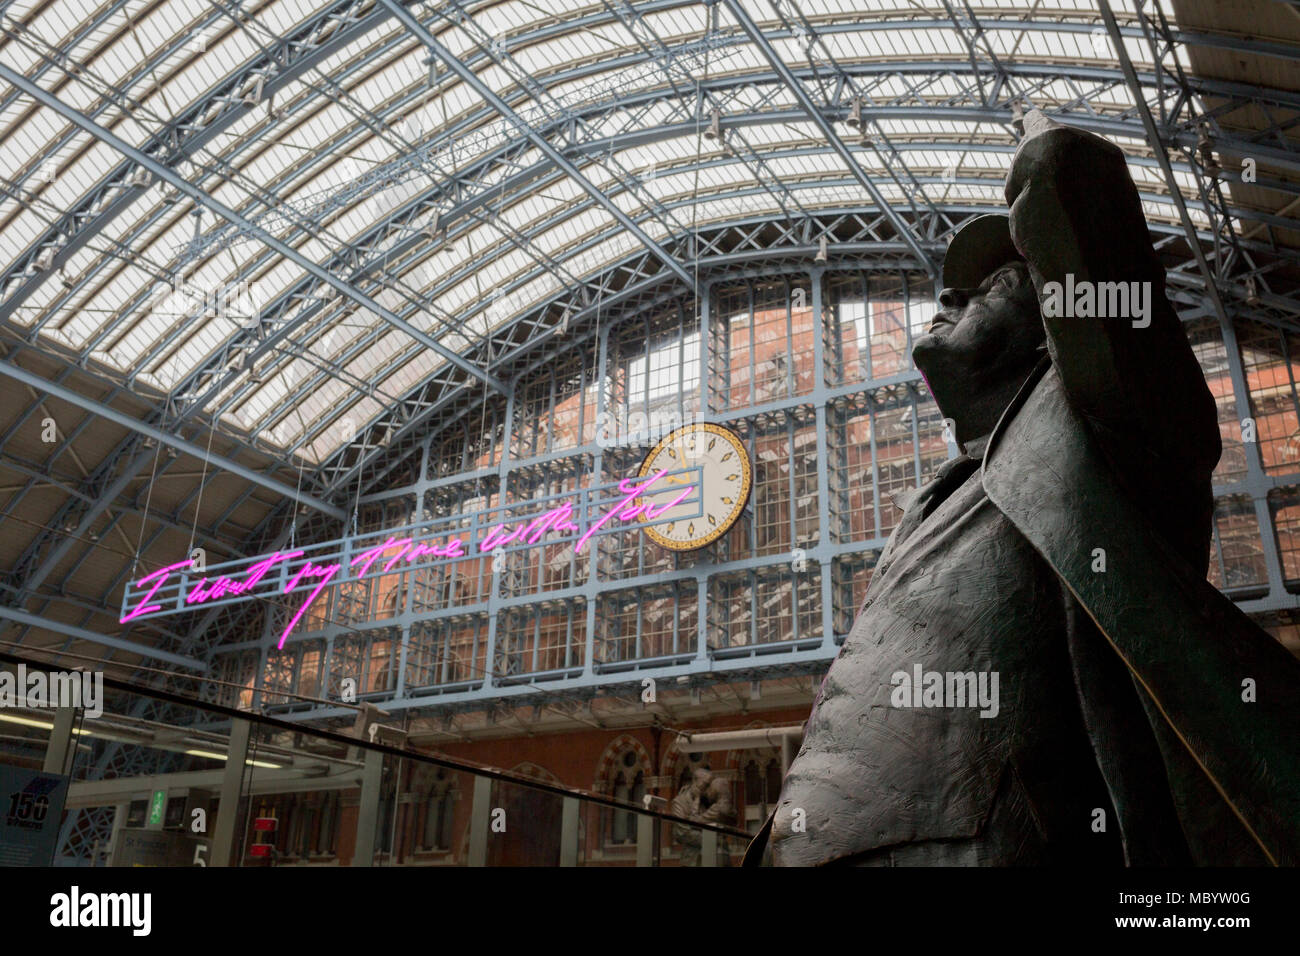 The statue of poet John Betjeman by Martin Jennings looks up to the new artwork entitled 'I Want My Time With You' by British (Britpop) artist Tracy Emin which hangs over the main concourse at St. Pancras Station, on 10th April 2018, in London, England. In the sixth year of the Terrace Wires Commission - and in celebration of the 150th anniversary of St Pancras International and the 250th anniversary of the Royal Academy of Arts, at one of London's mainline station, the London hub for Eurostar - the 20 metre-long greeting to commuters reads 'I Want My Time With You' and Emin thinks that arrivi Stock Photo